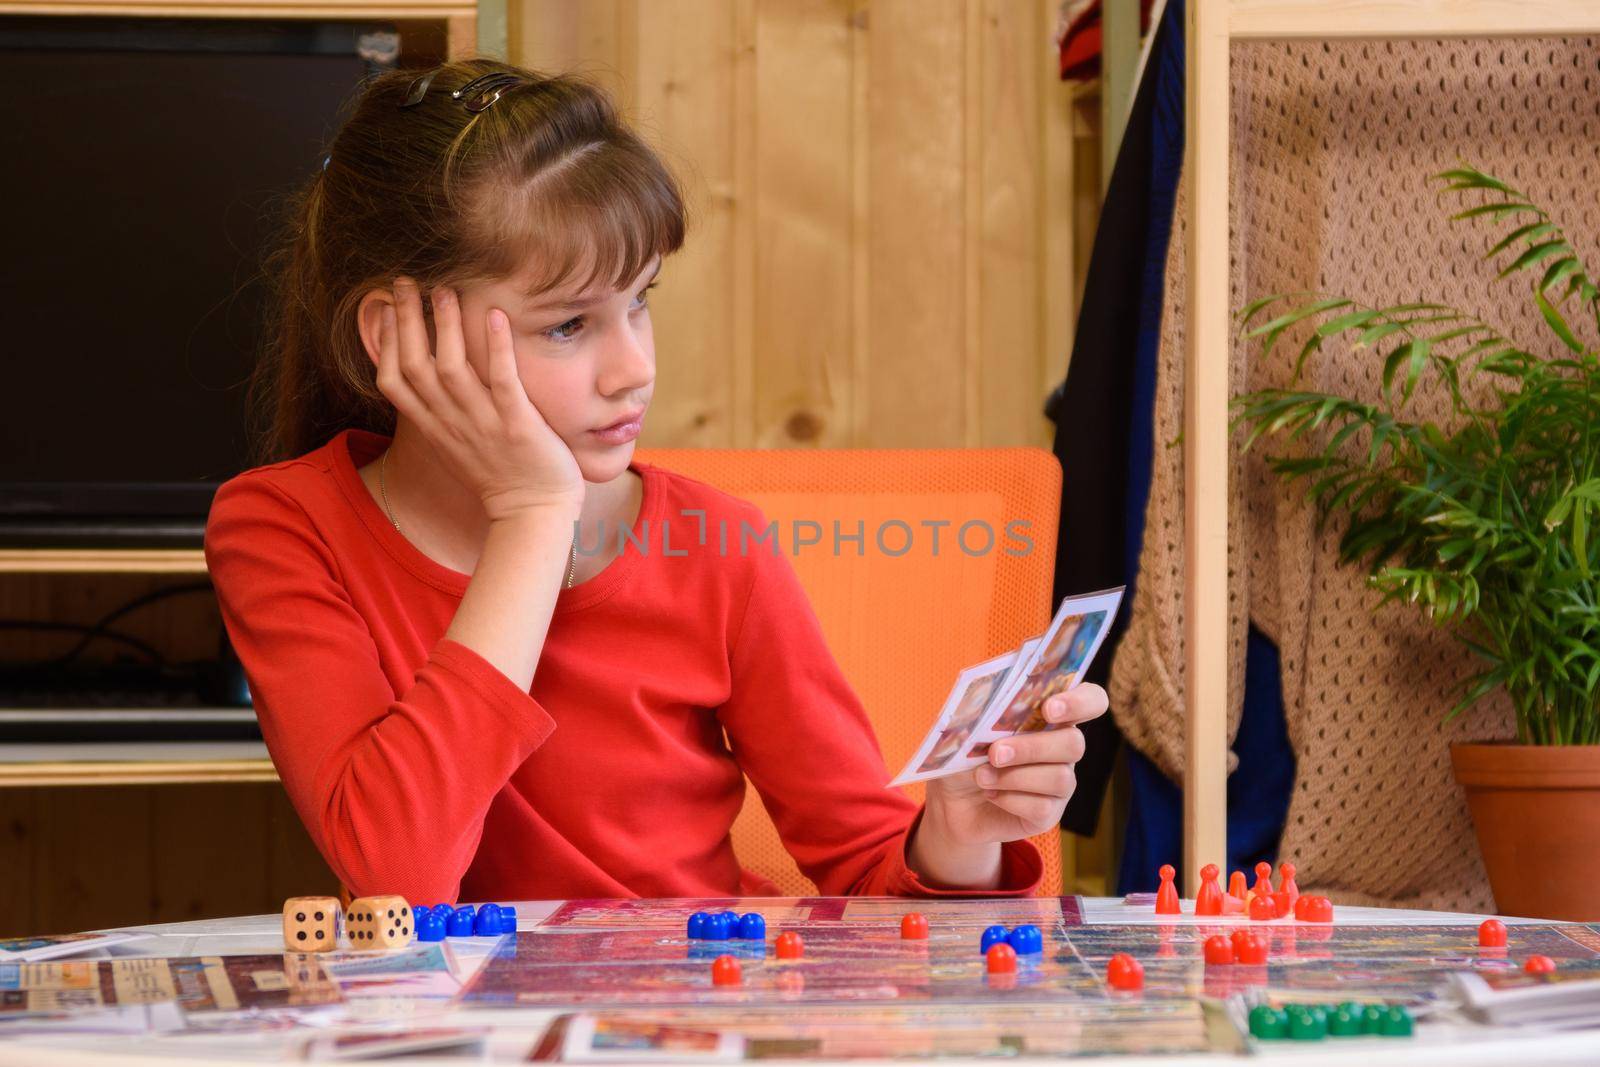 The girl plays board games and is thoughtful holding cards in her hand